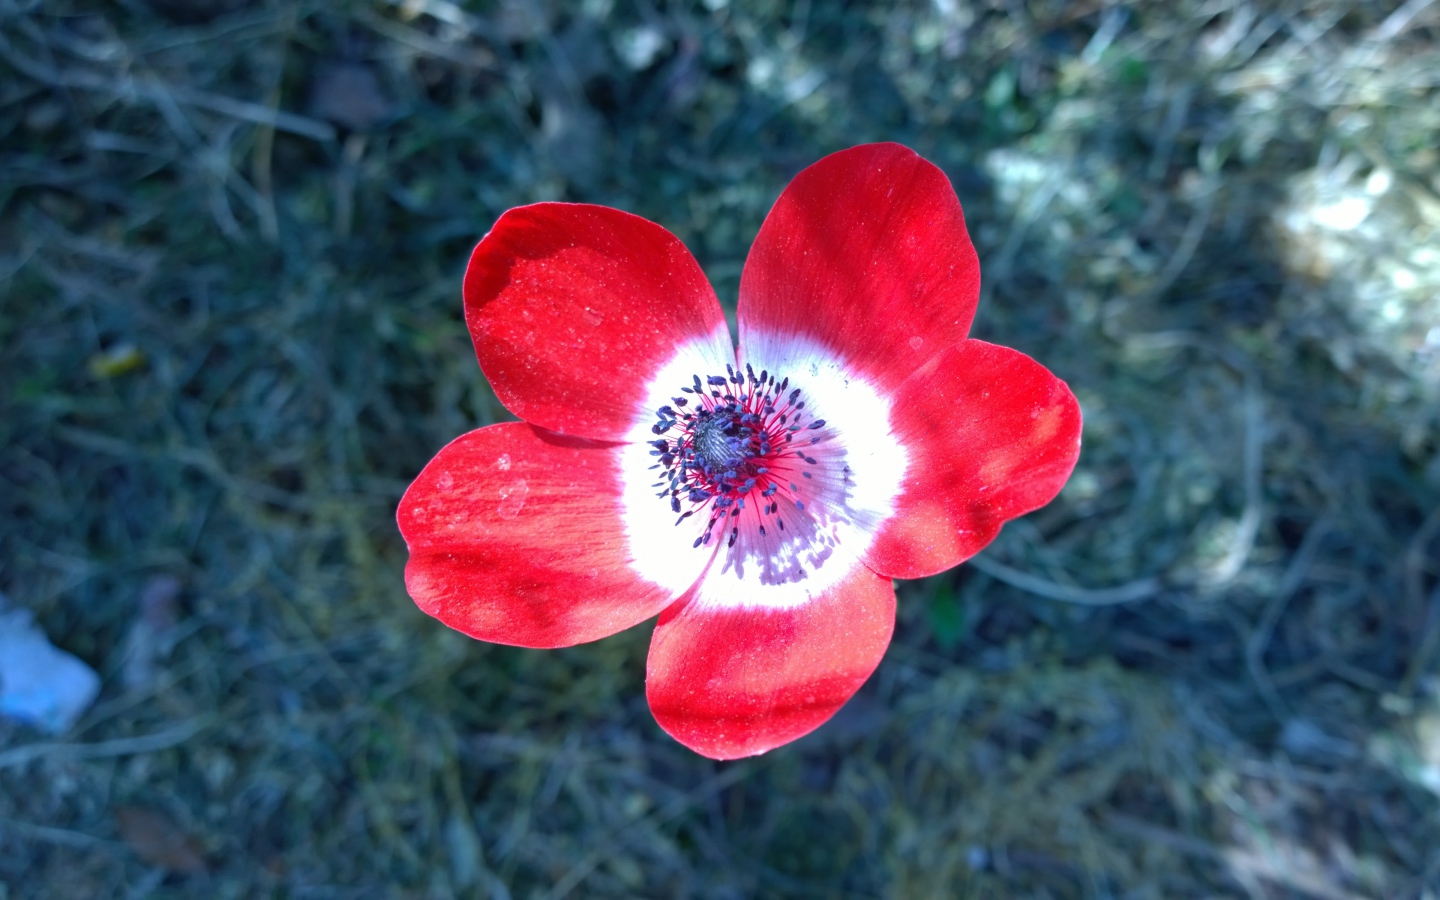 Red anemone flower close-up